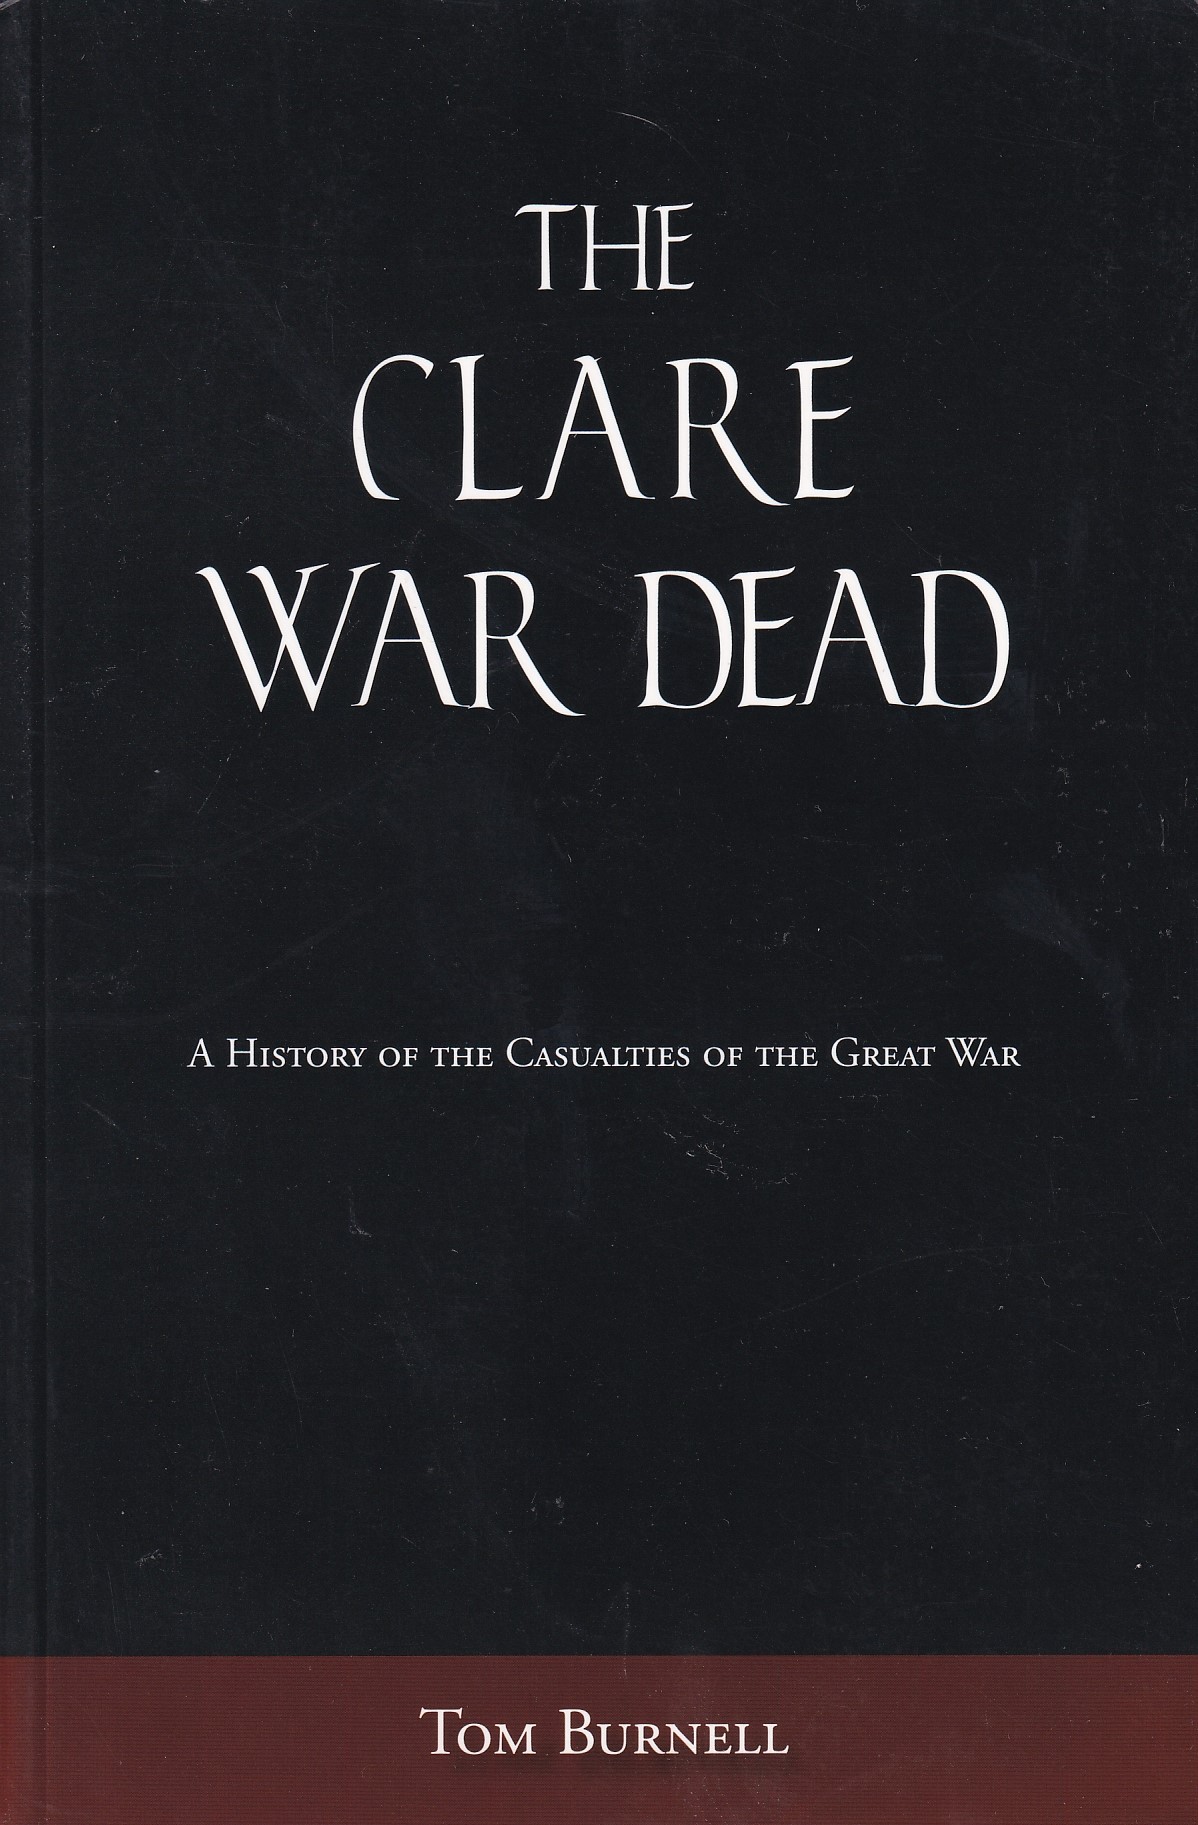 The Clare War Dead by Tom Burnell